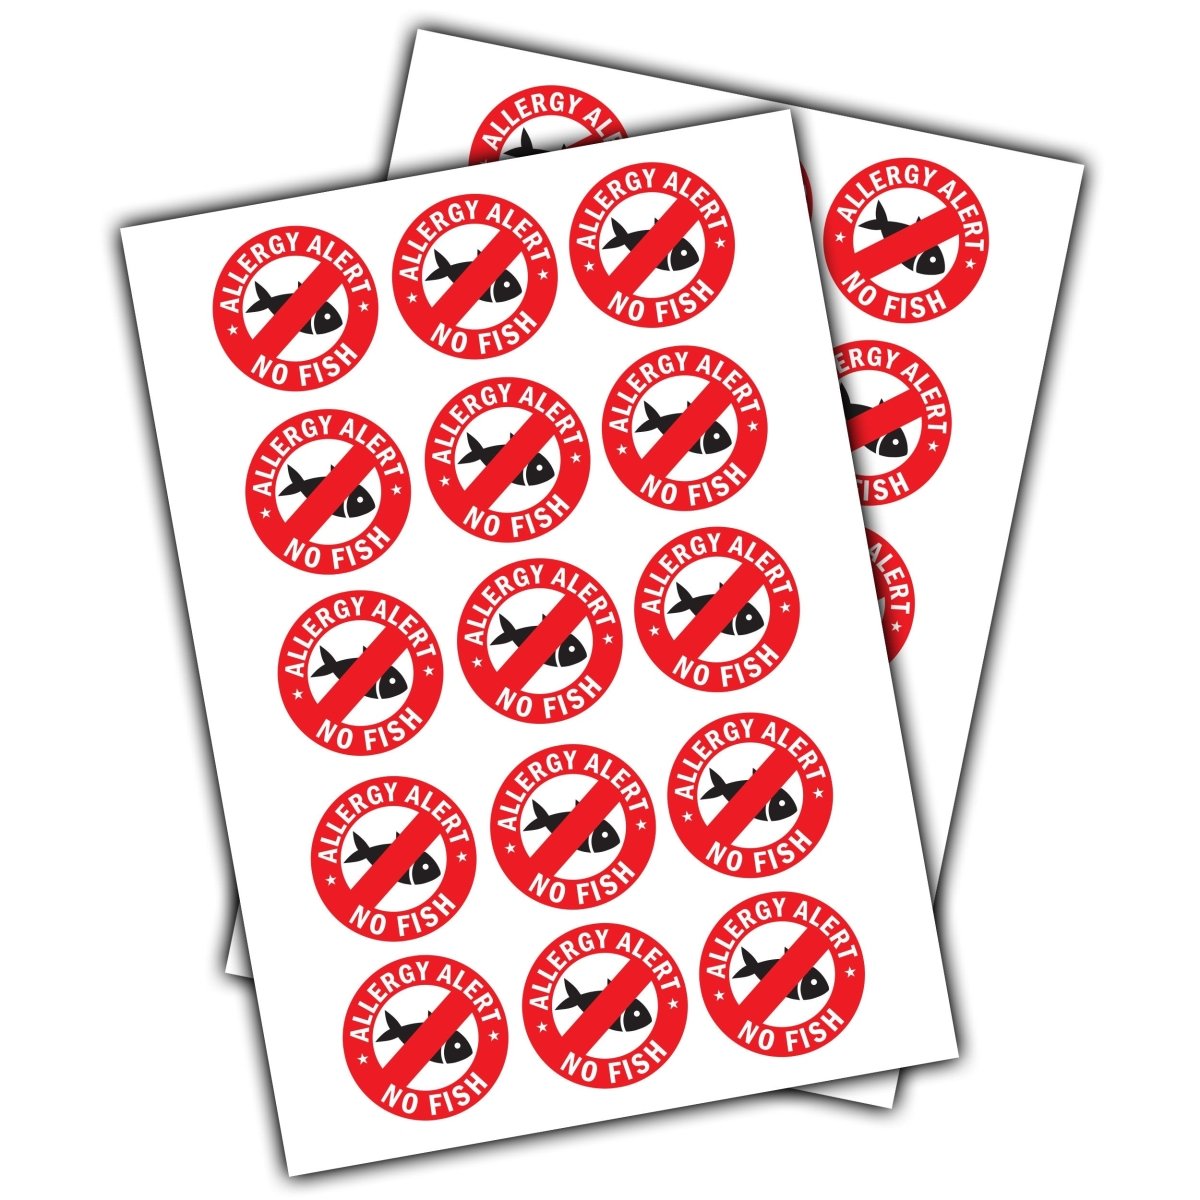 Fish Allergy Alert Stickers: Stay Safe, Stay Allergy-Free! - Decords